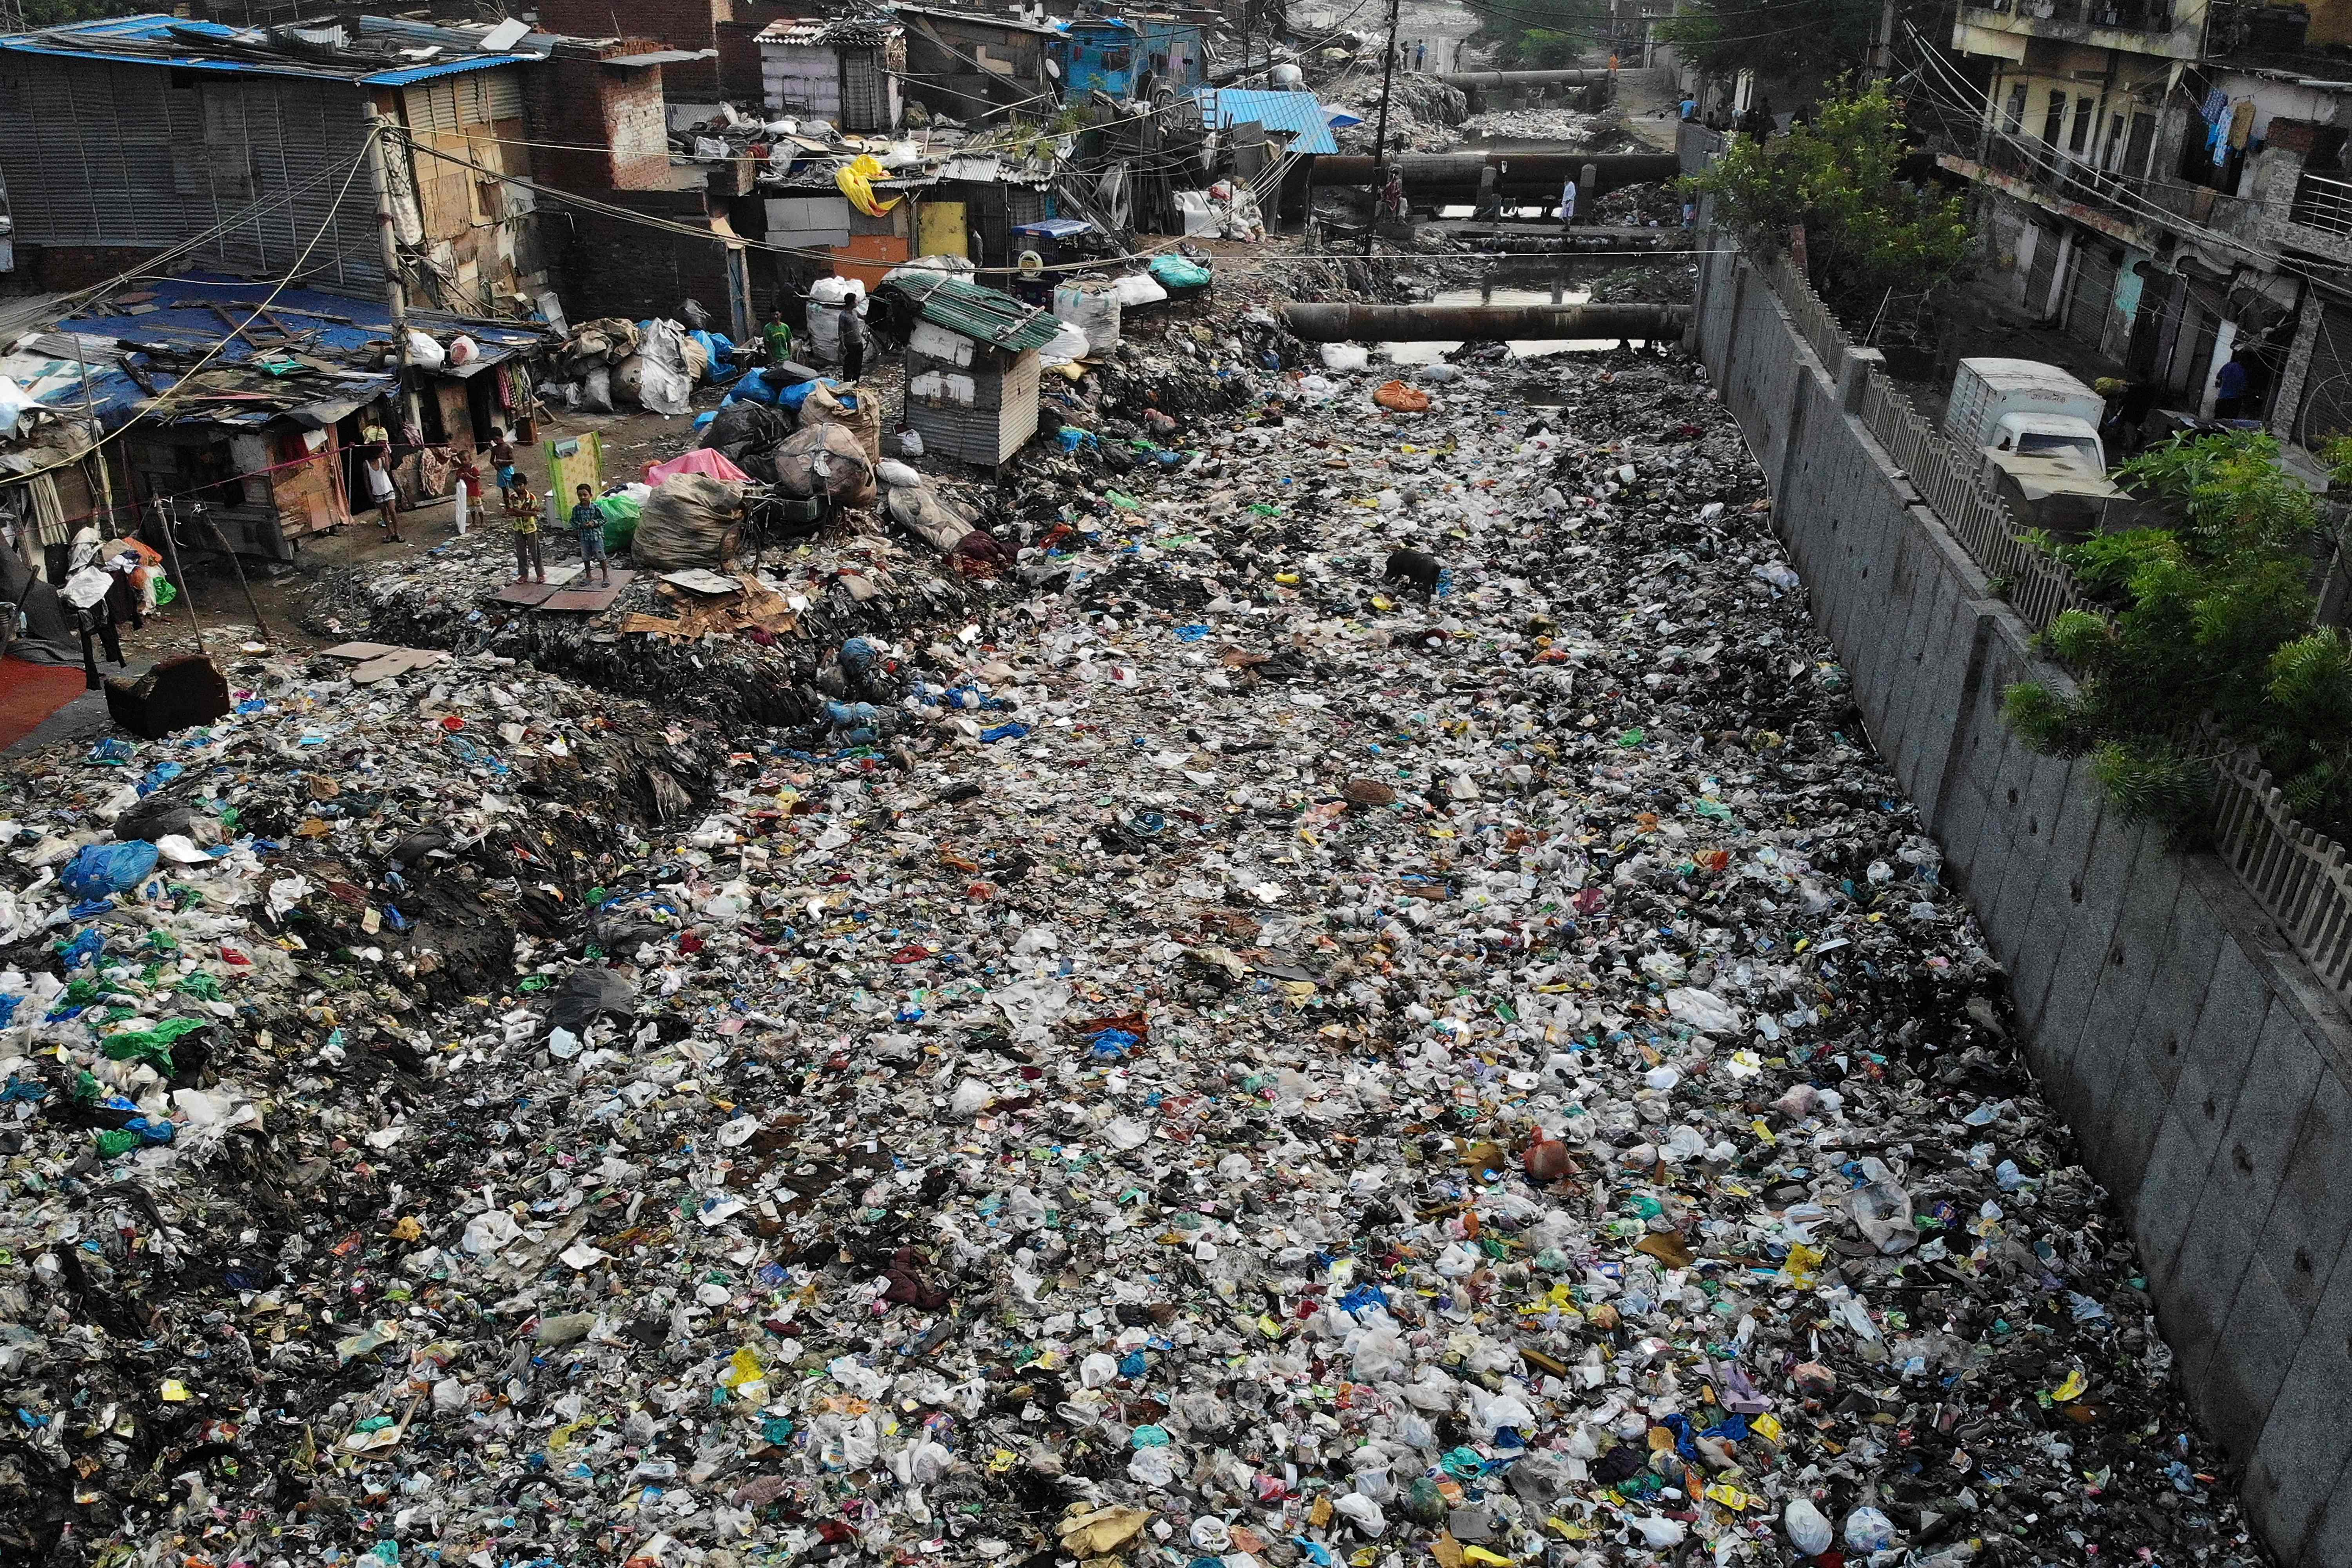 File: In this aerial photo taken on 4 October 2019, children (left) stand near a polluted sewage drain canal covered in garbage in a low-income neighborhood in New Delhi